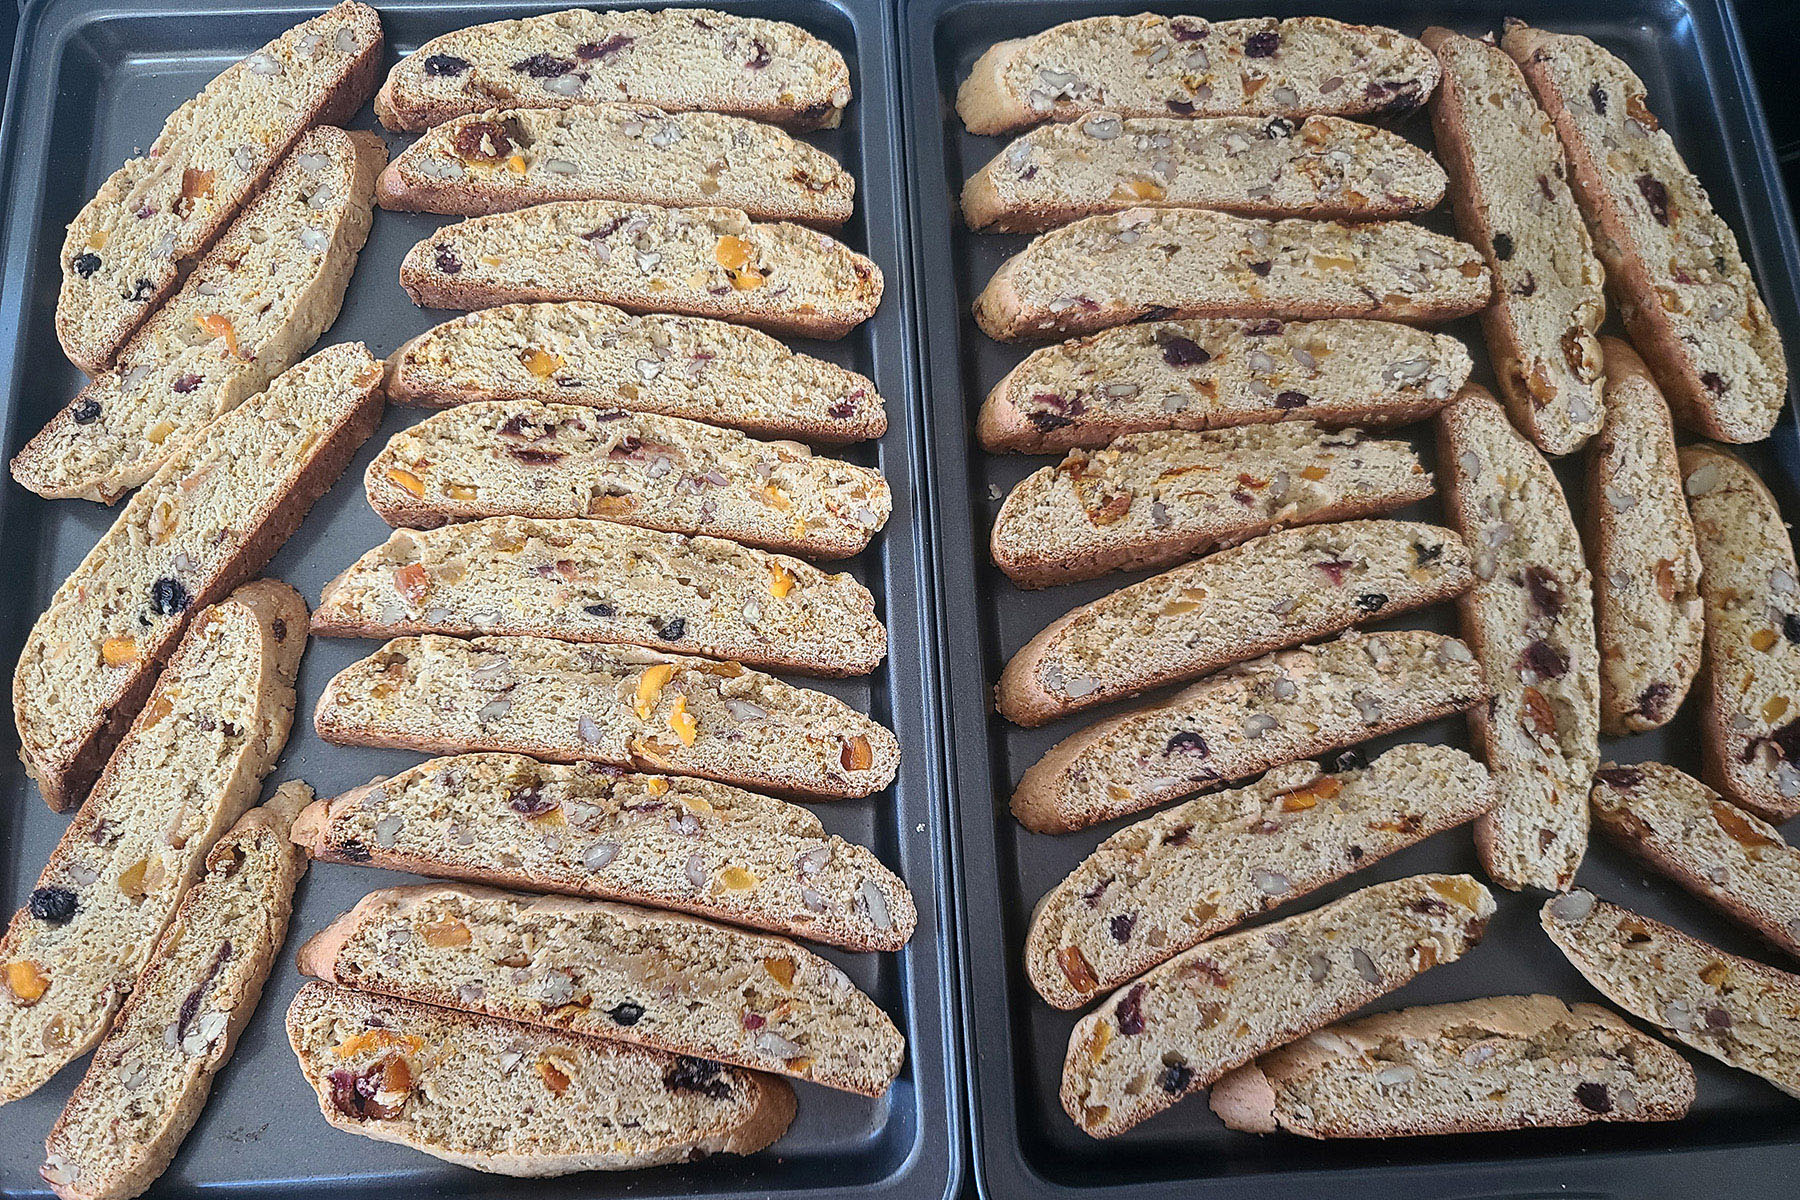 A close up view of two pans with the sliced biscotti arranged on them.